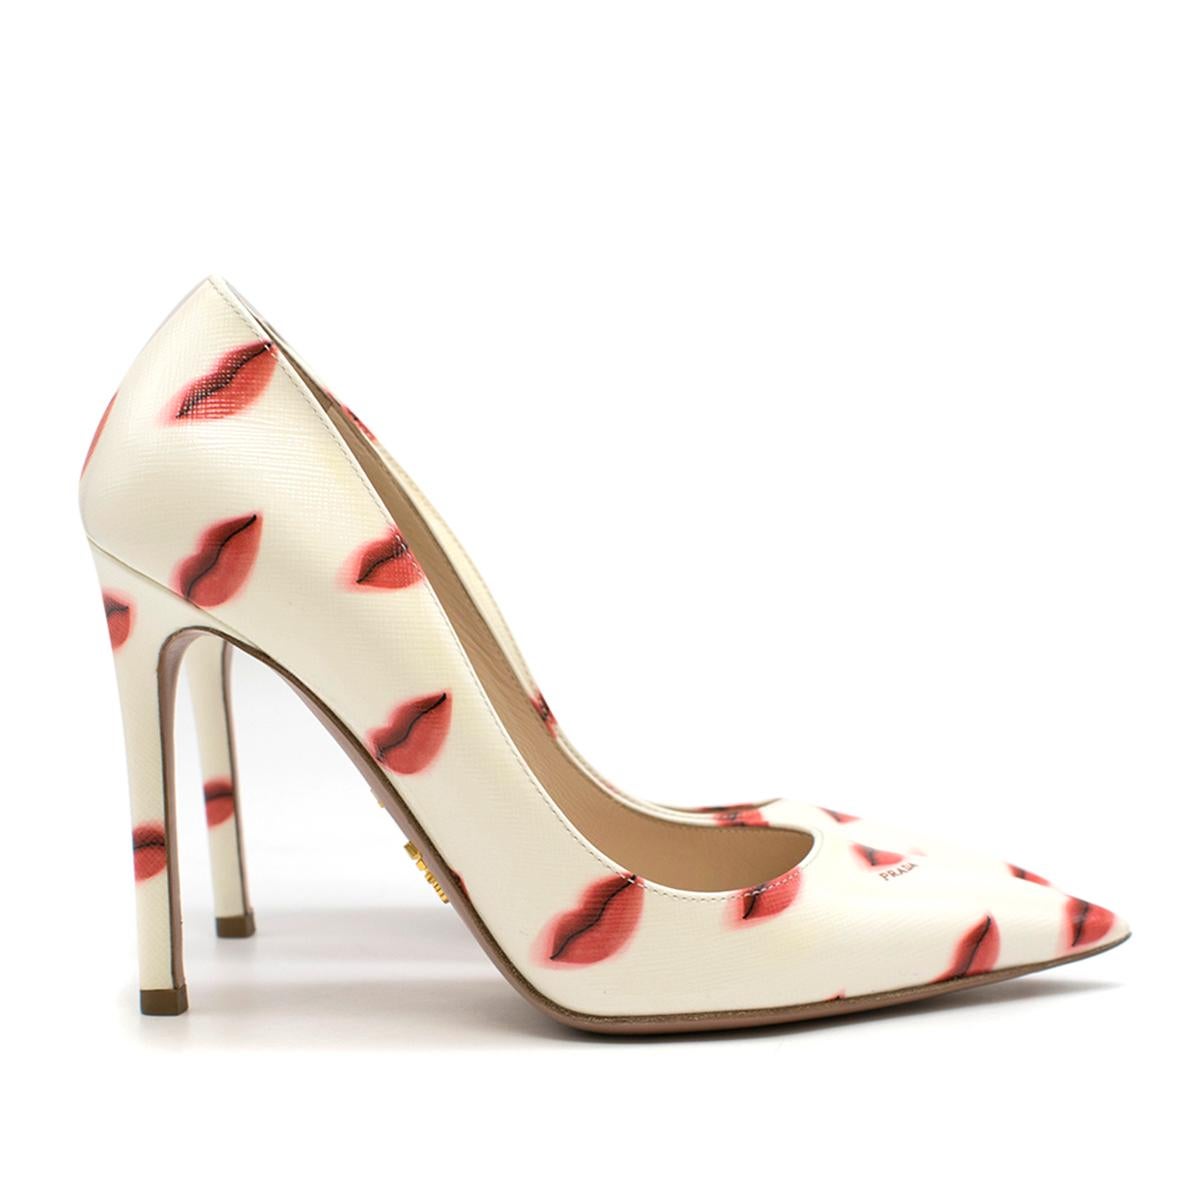 Prada White Lips-print Leather Pump

- White leather pump
- Slip on style
- Lips print
- 100 stiletto heel
- Pointed toe
- Nude leather lining with logo embroidered
- This item comes with the original dust bag and box

Please note, these items are